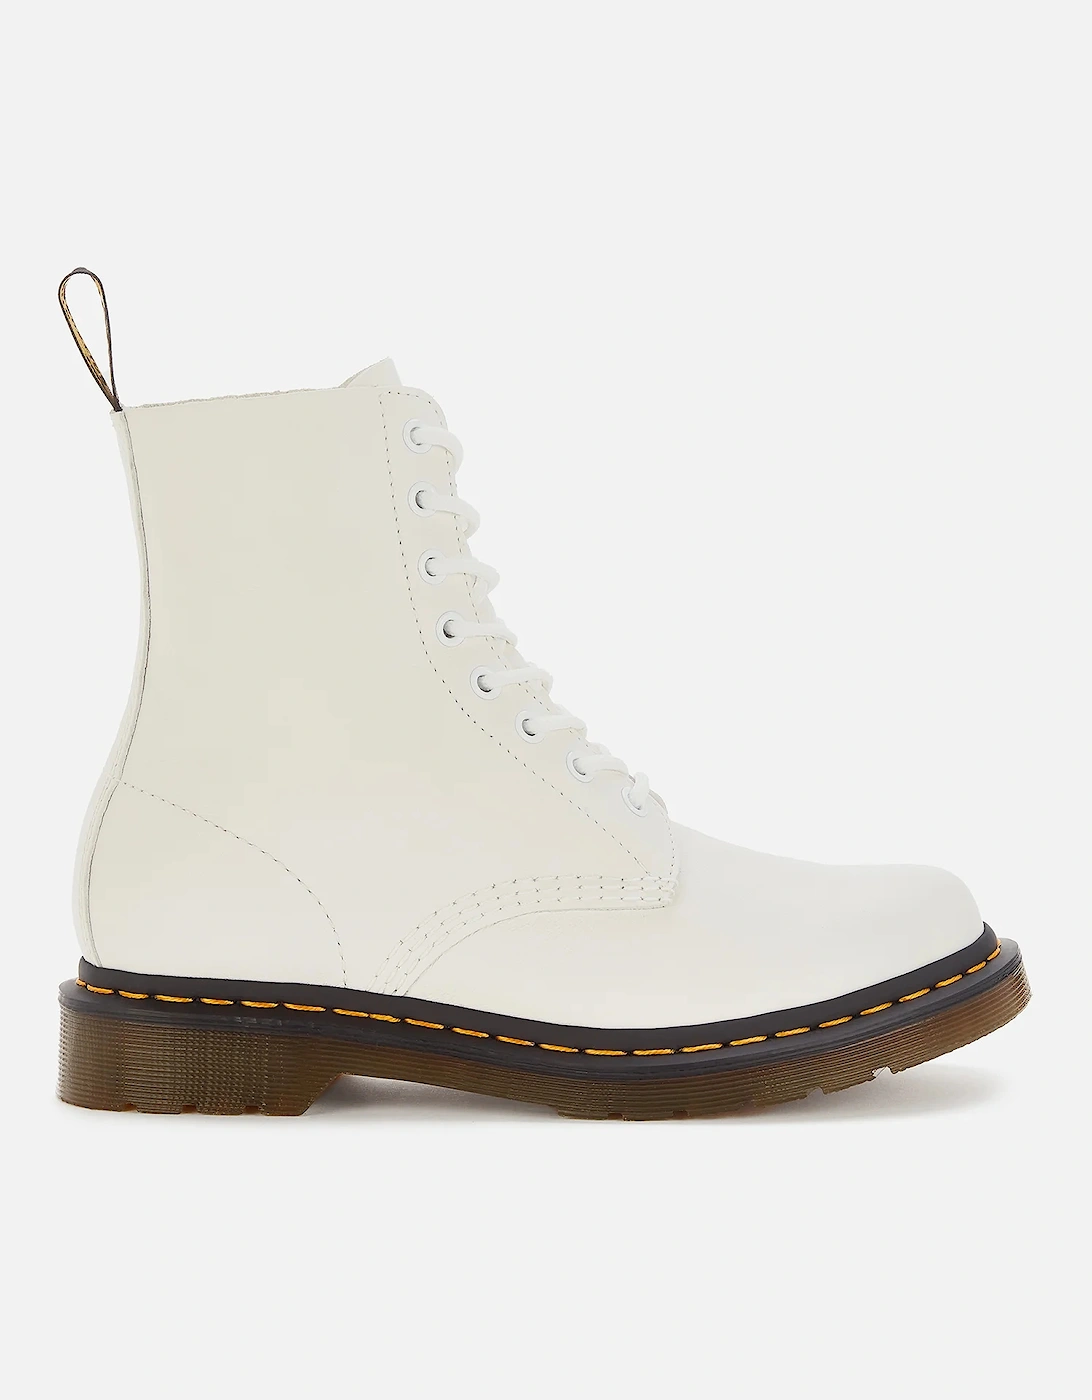 Dr. Martens Women's 1460 Pascal Virginia Leather 8-Eye Boots - Optical White - Dr. Martens - Home - Designer Brands A-Z - Dr. Martens - Dr. Martens Women's 1460 Pascal Virginia Leather 8-Eye Boots - Optical White